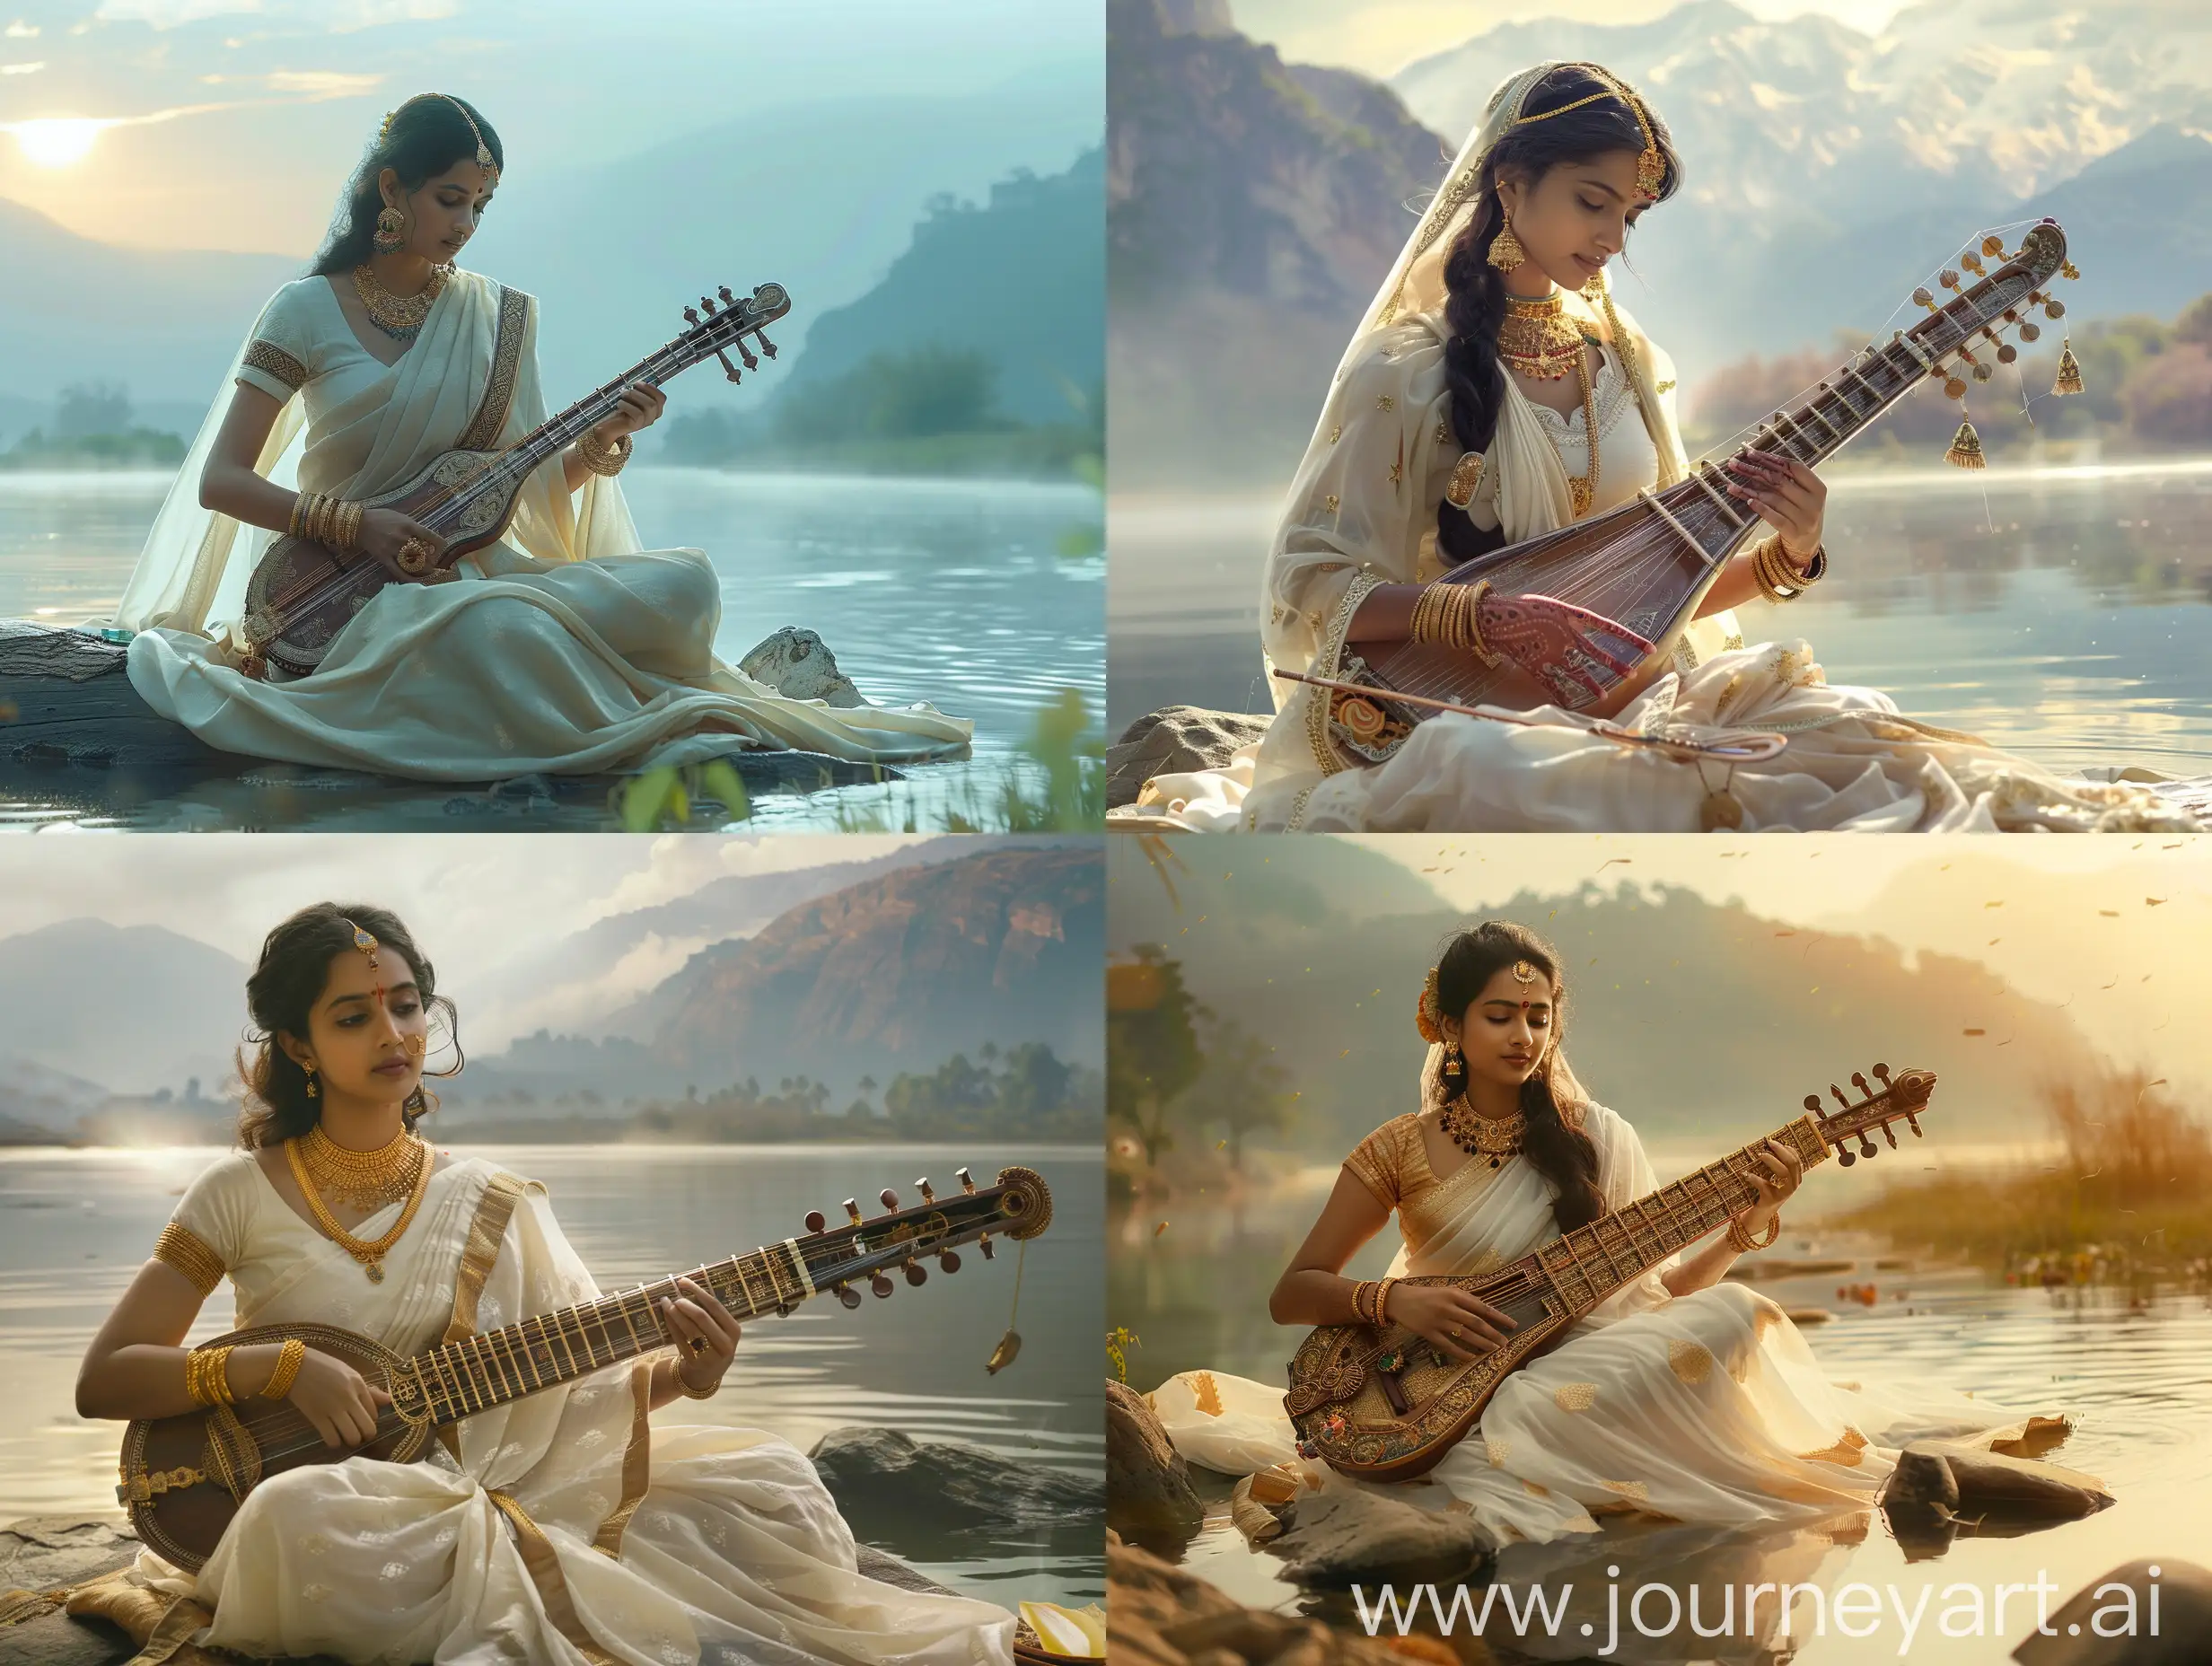 a young lady dressed in white sari and beautiful gold ornaments playing sitar in a meditative state, saffron midst of early morning, riverside, mountains in background, cinematic from a distance, breathtaking surreal visualization